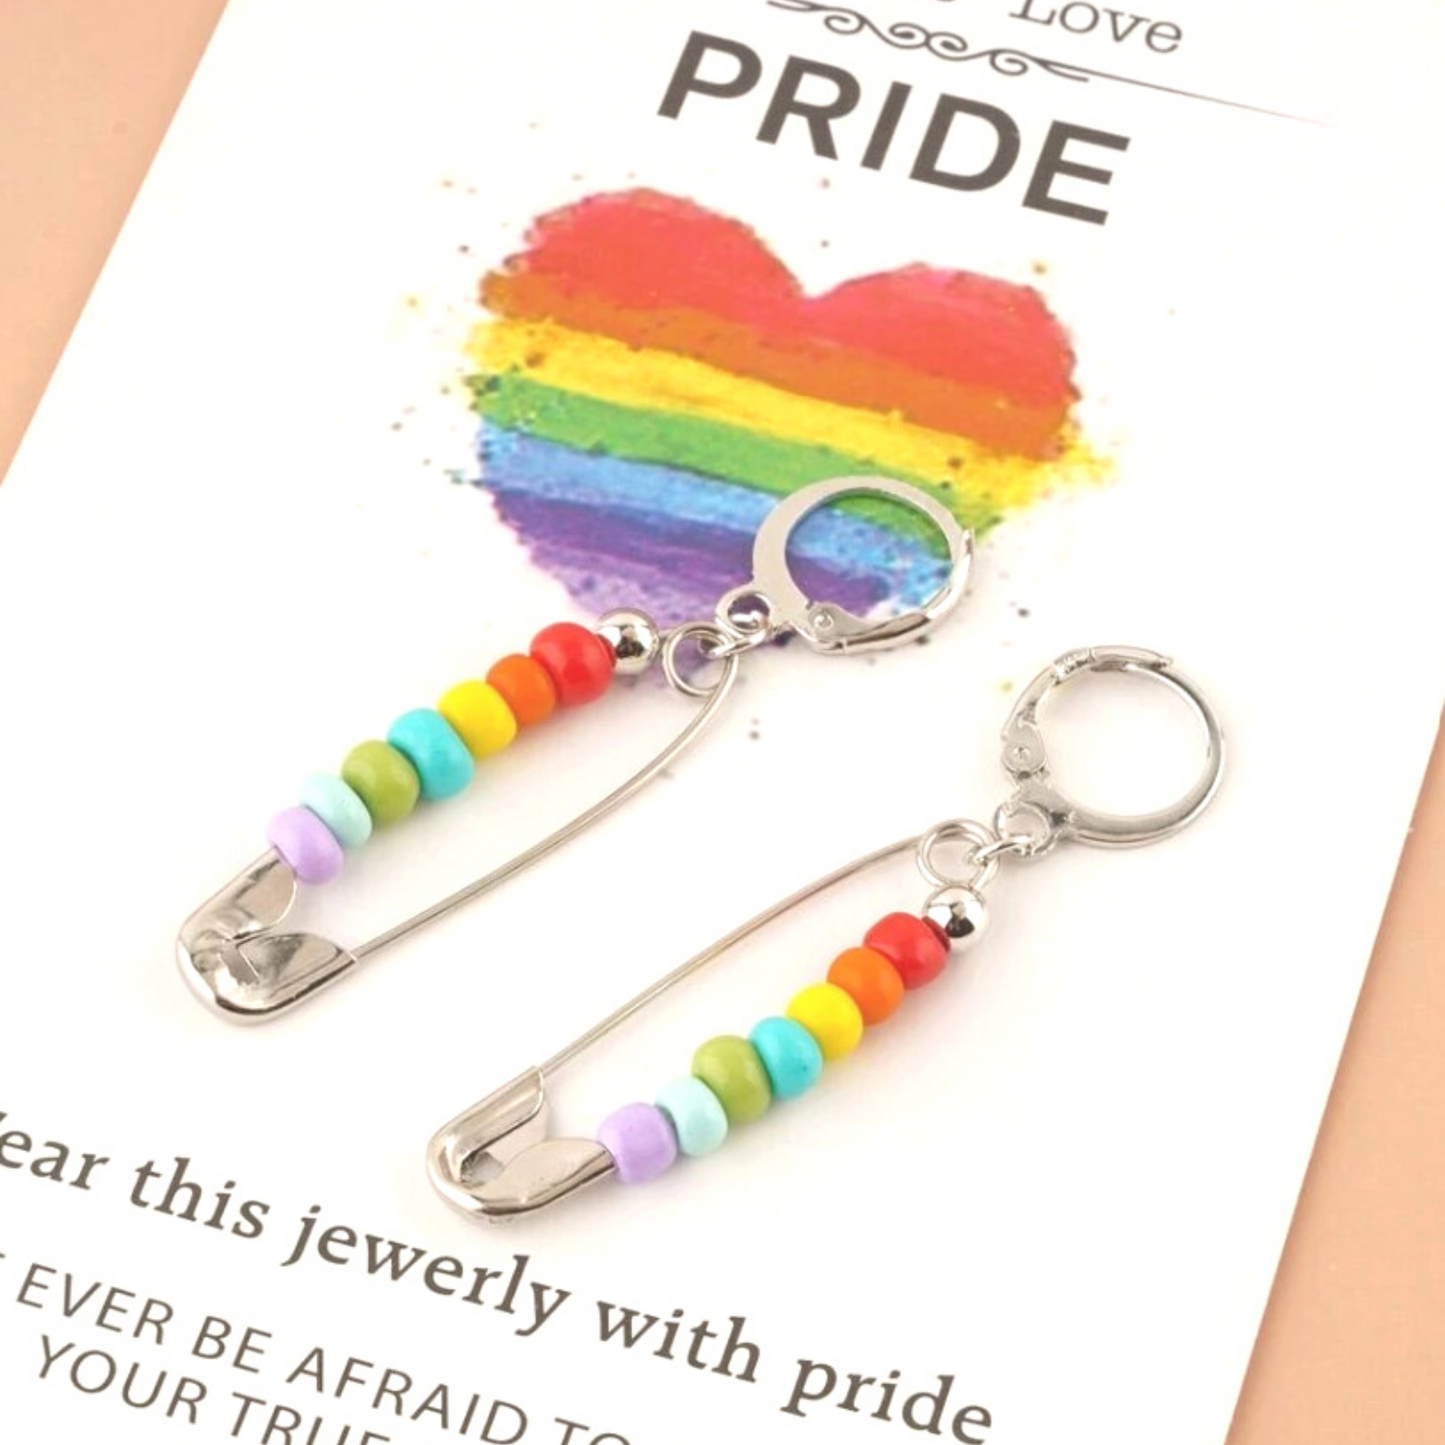 Pride Love is Love Rainbow Colorful Safety Pin Fashion Earrings